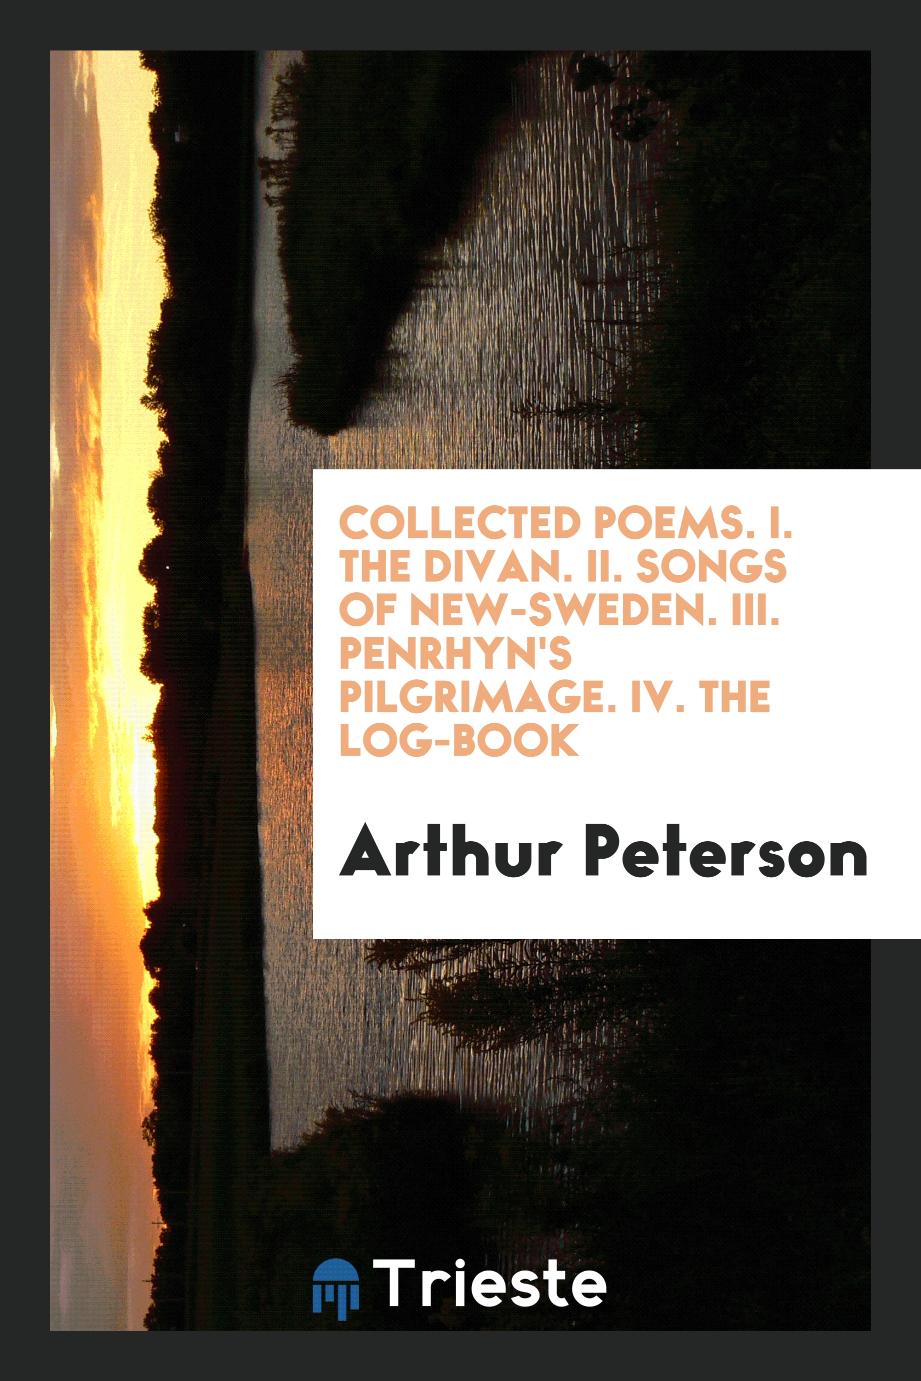 Collected Poems. I. The Divan. II. Songs of New-Sweden. III. Penrhyn's Pilgrimage. IV. The Log-Book